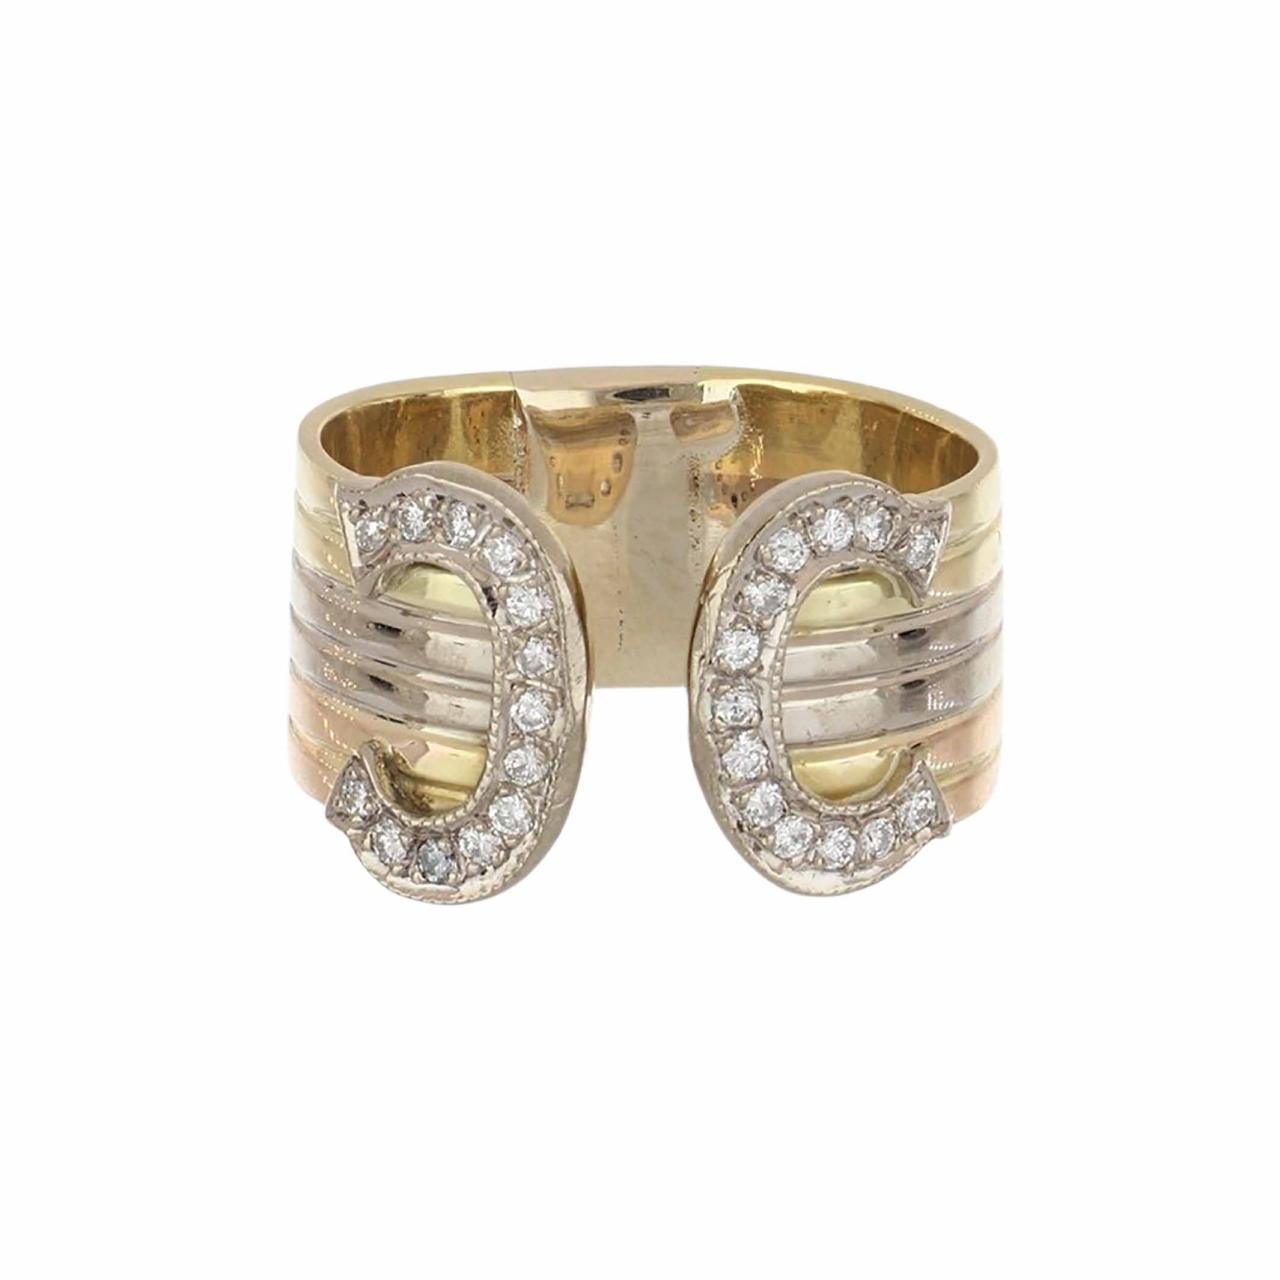 Cartier 3 Band Trinity Ring in 18K Solid Gold – ASSAY